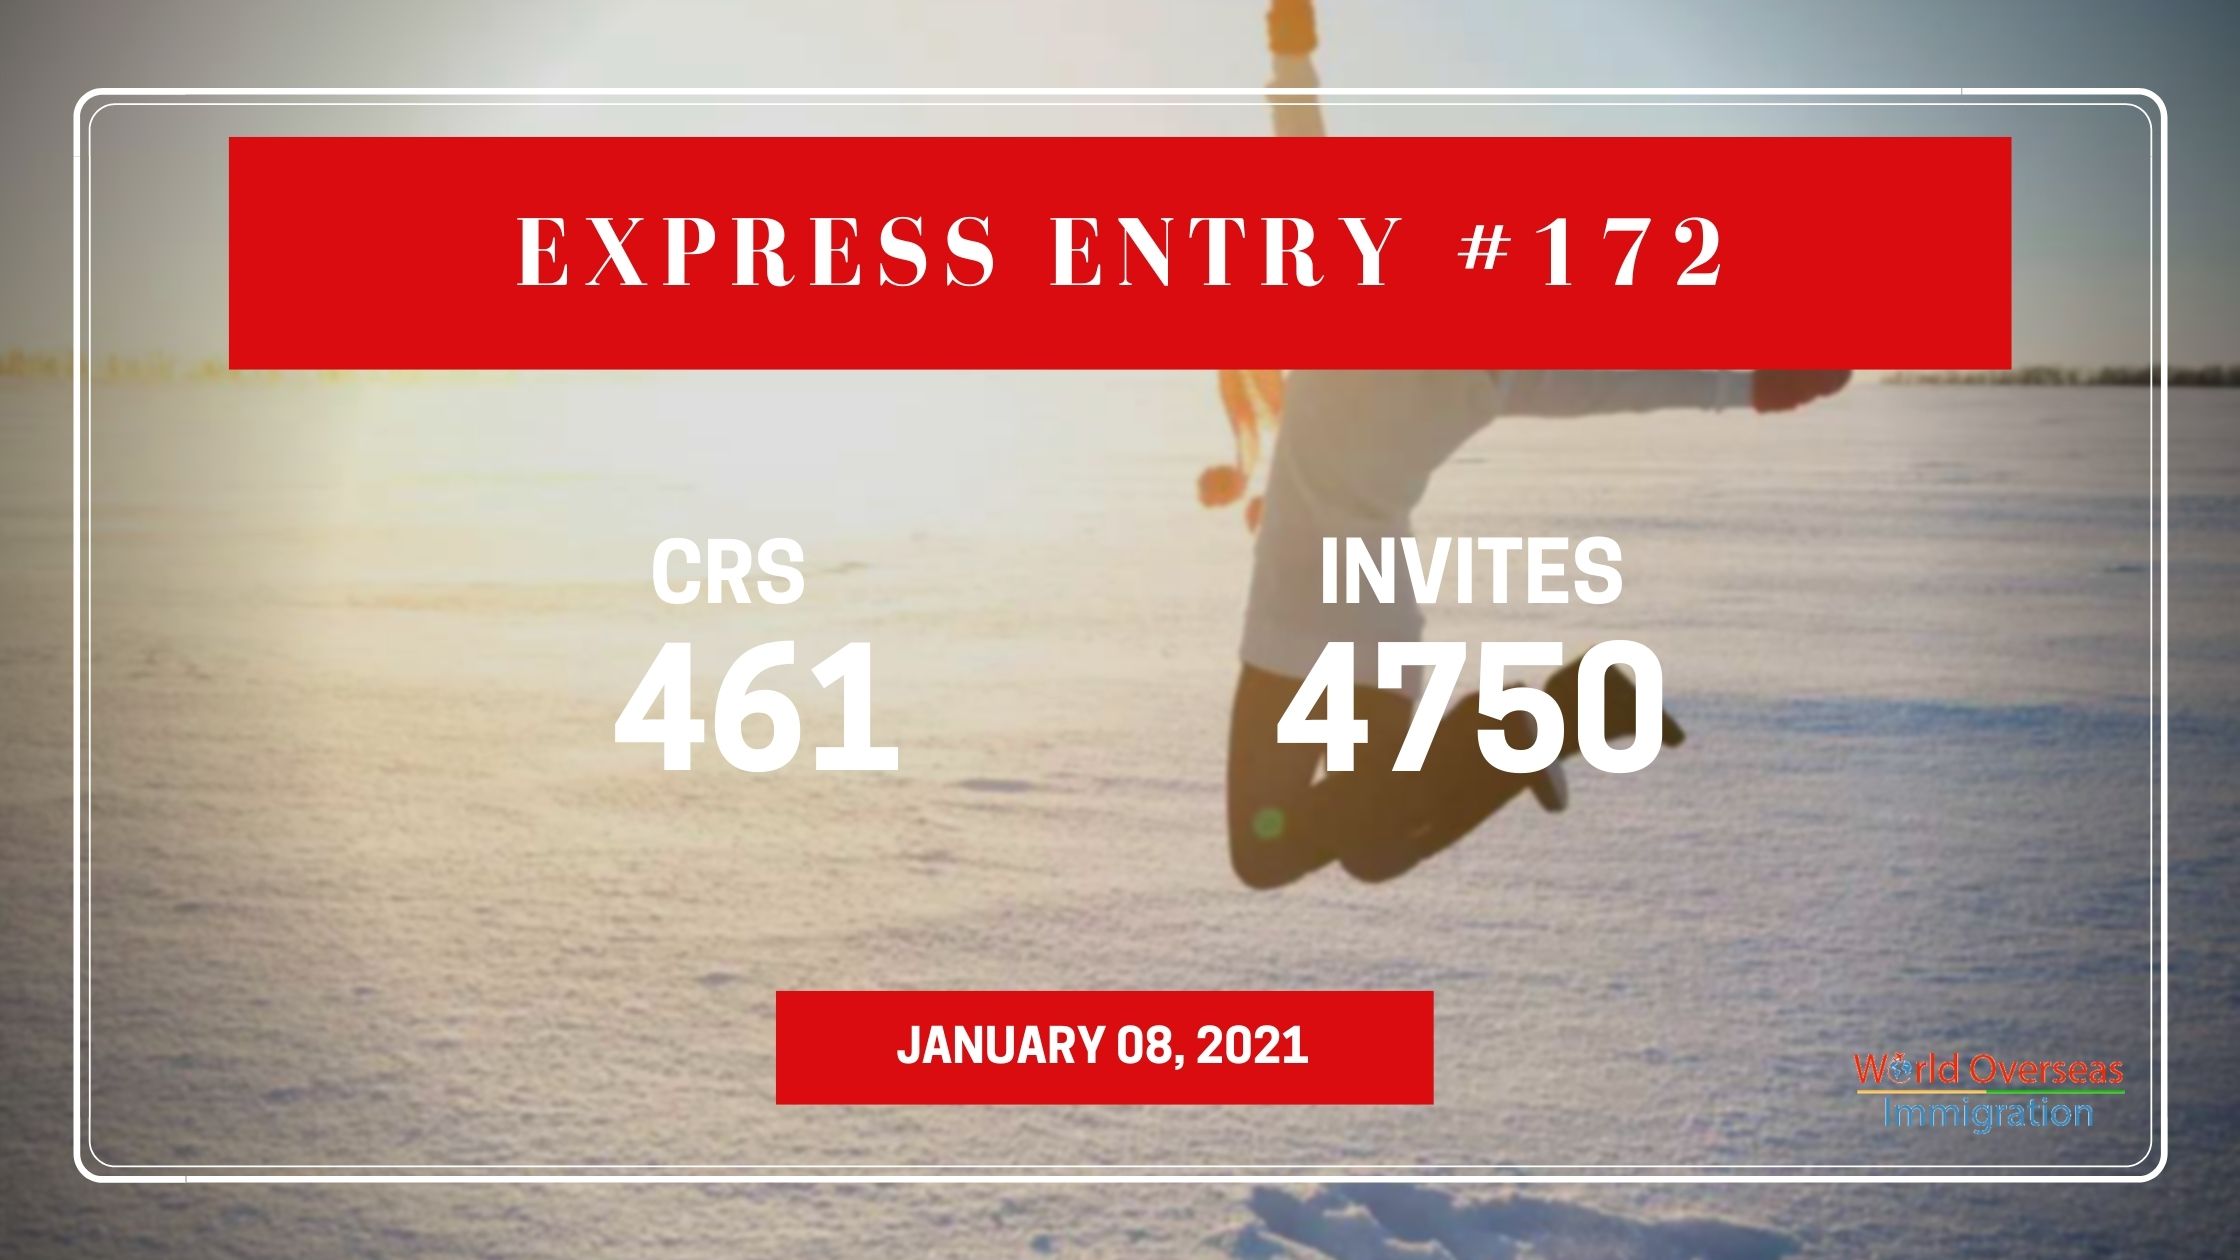 Express Entry #172: 4,750 ITAs are issued in the new draw